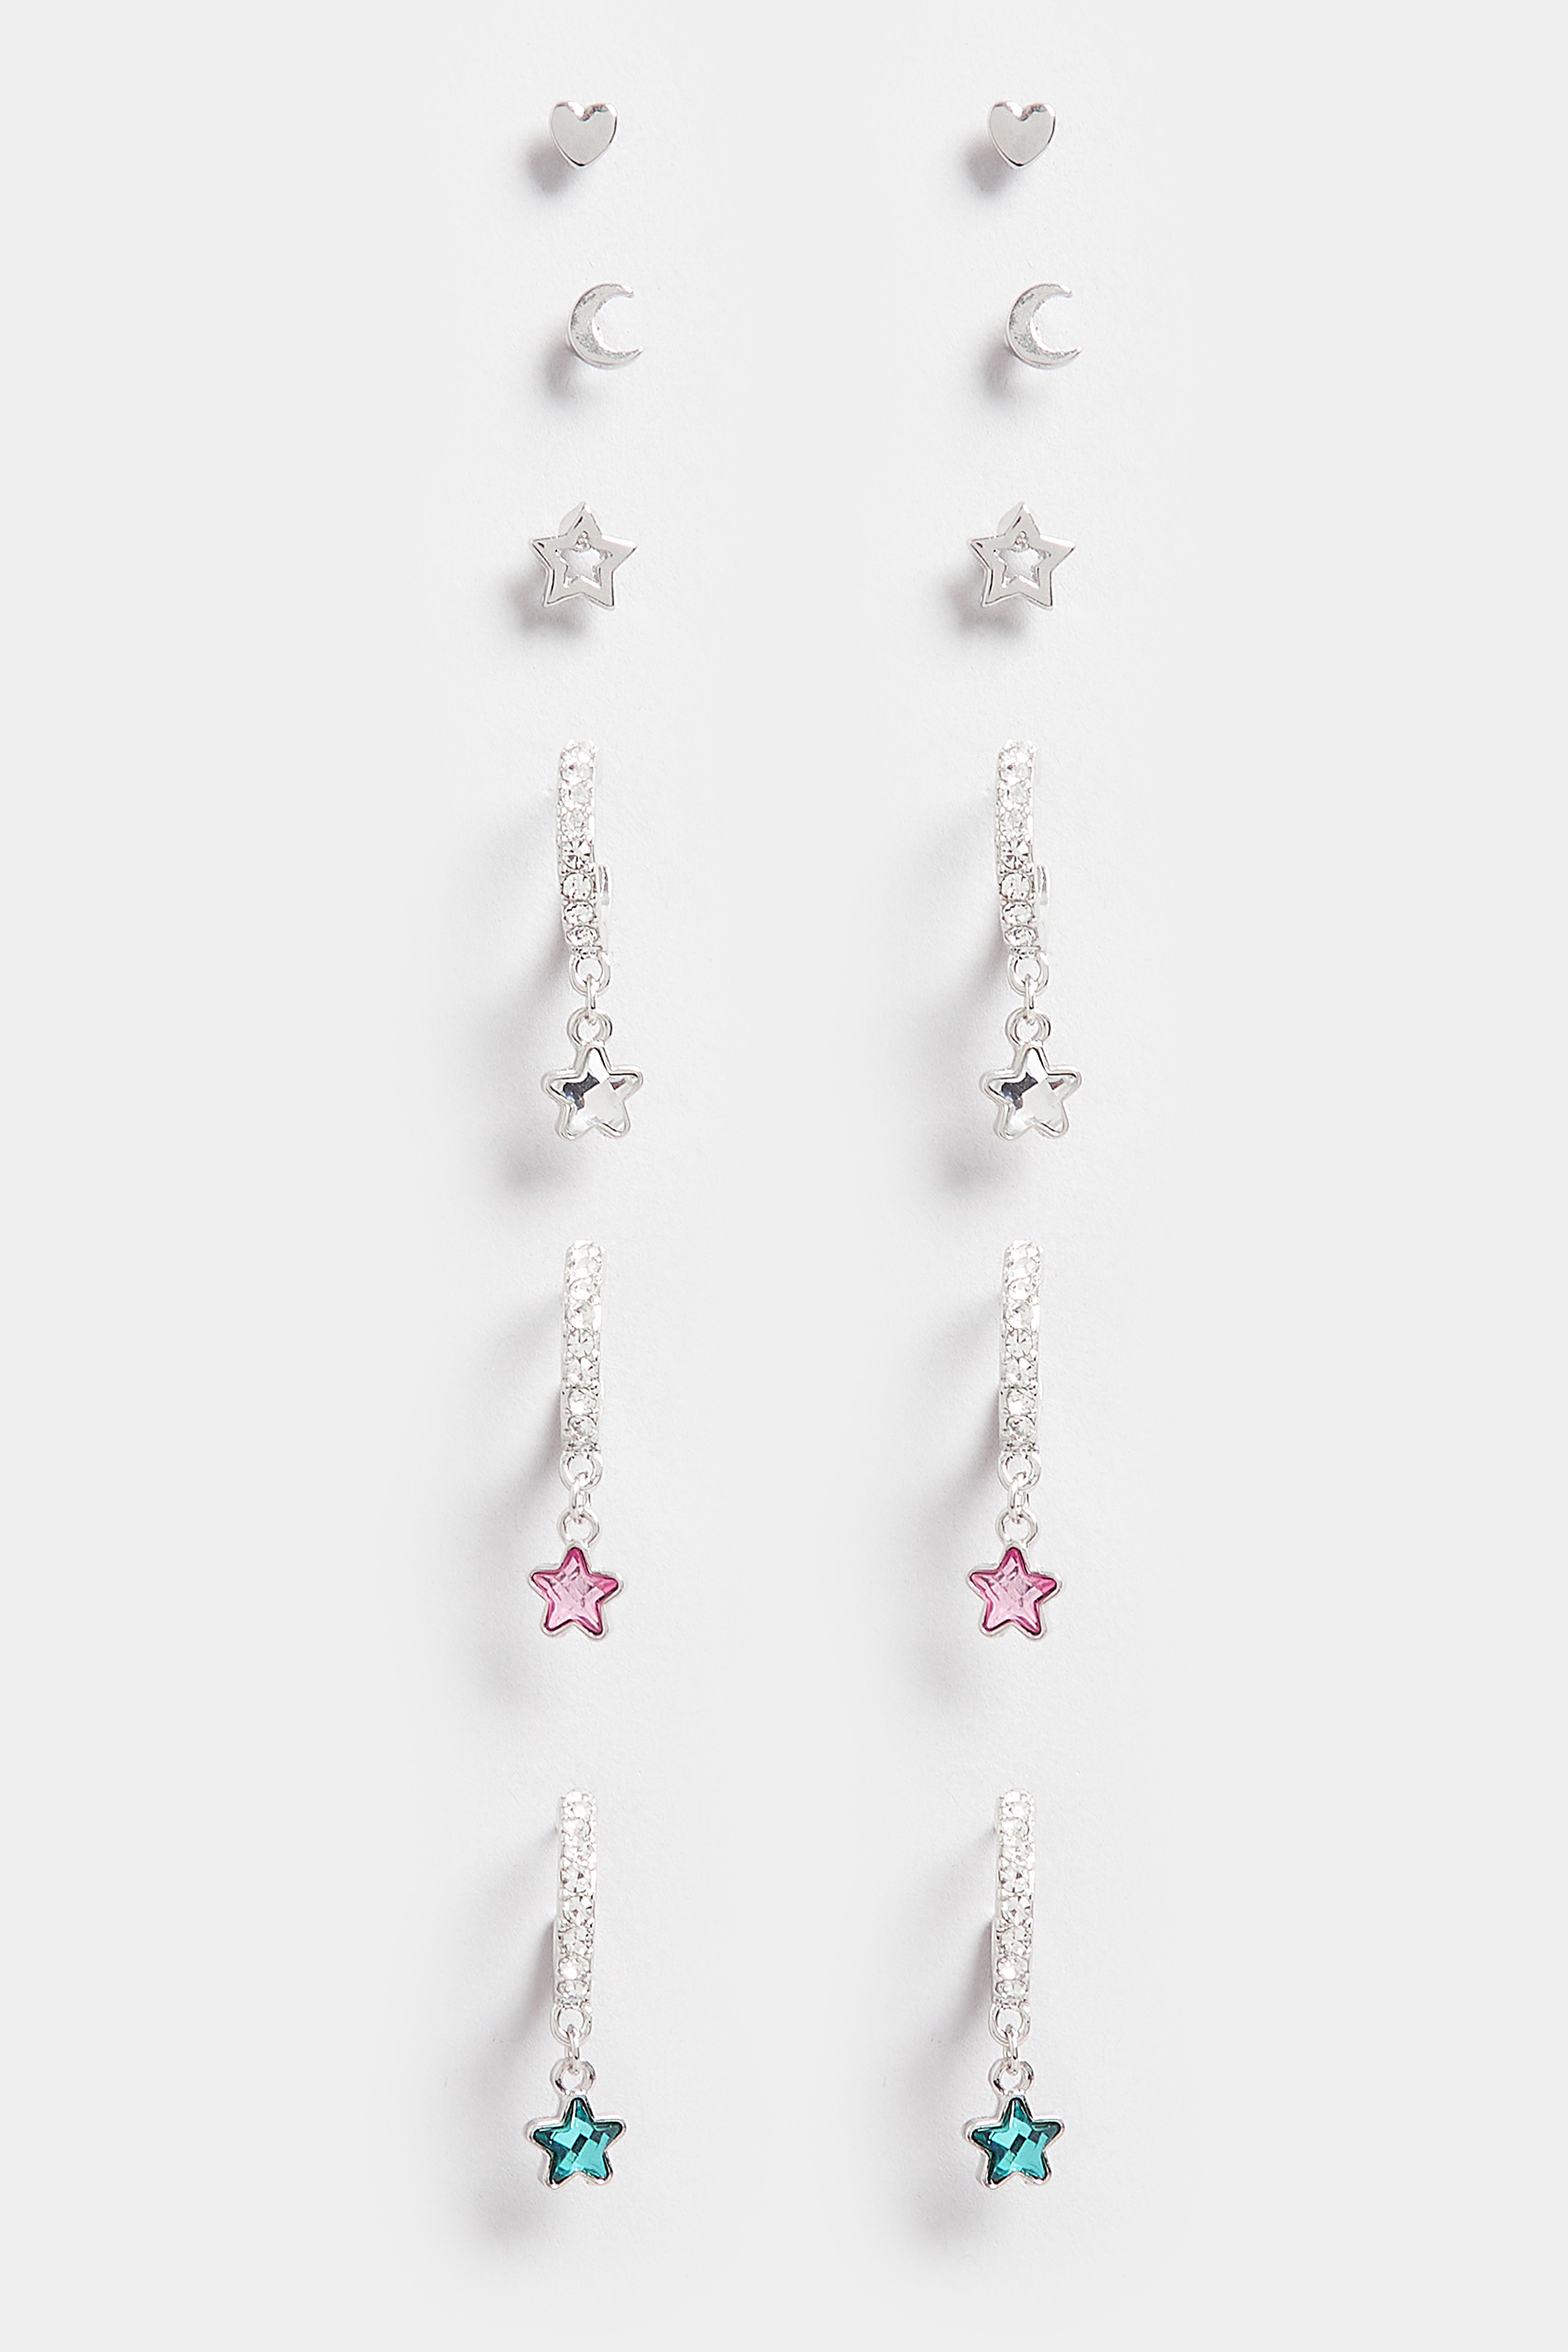 6 PACK Silver Diamante Star Earrings Set | Yours Clothing  2